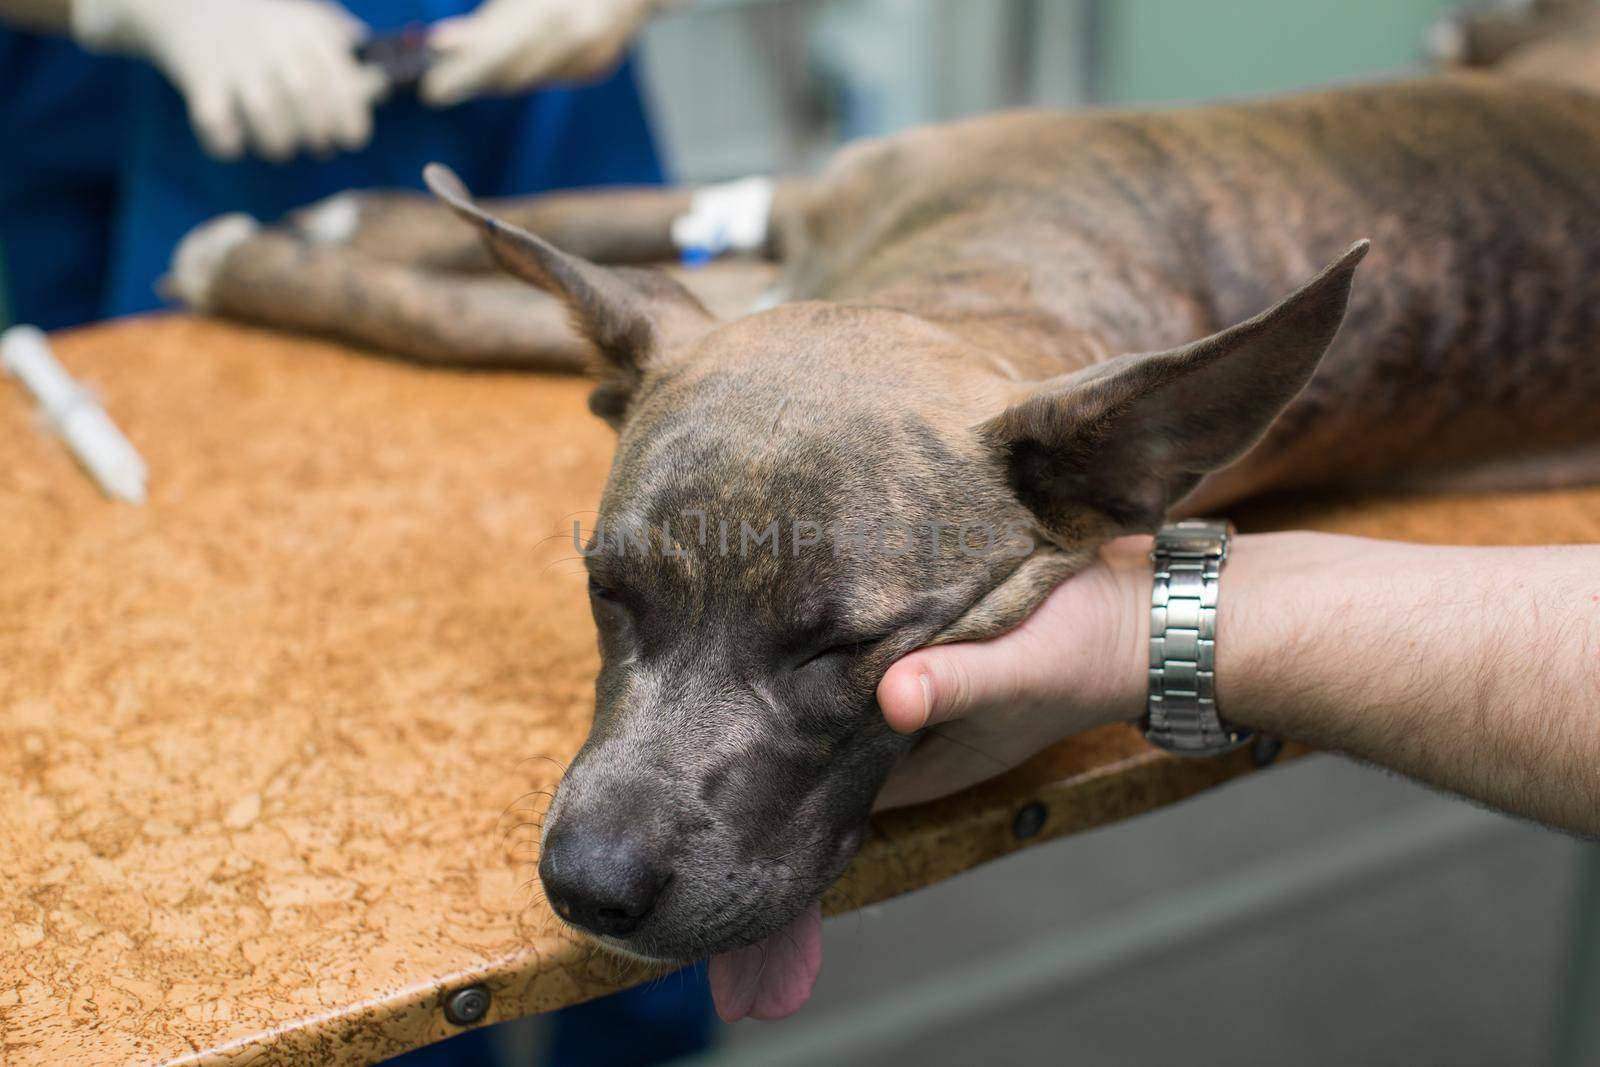 The dog is under anesthesia before surgery in a veterinary clinic. by StudioPeace